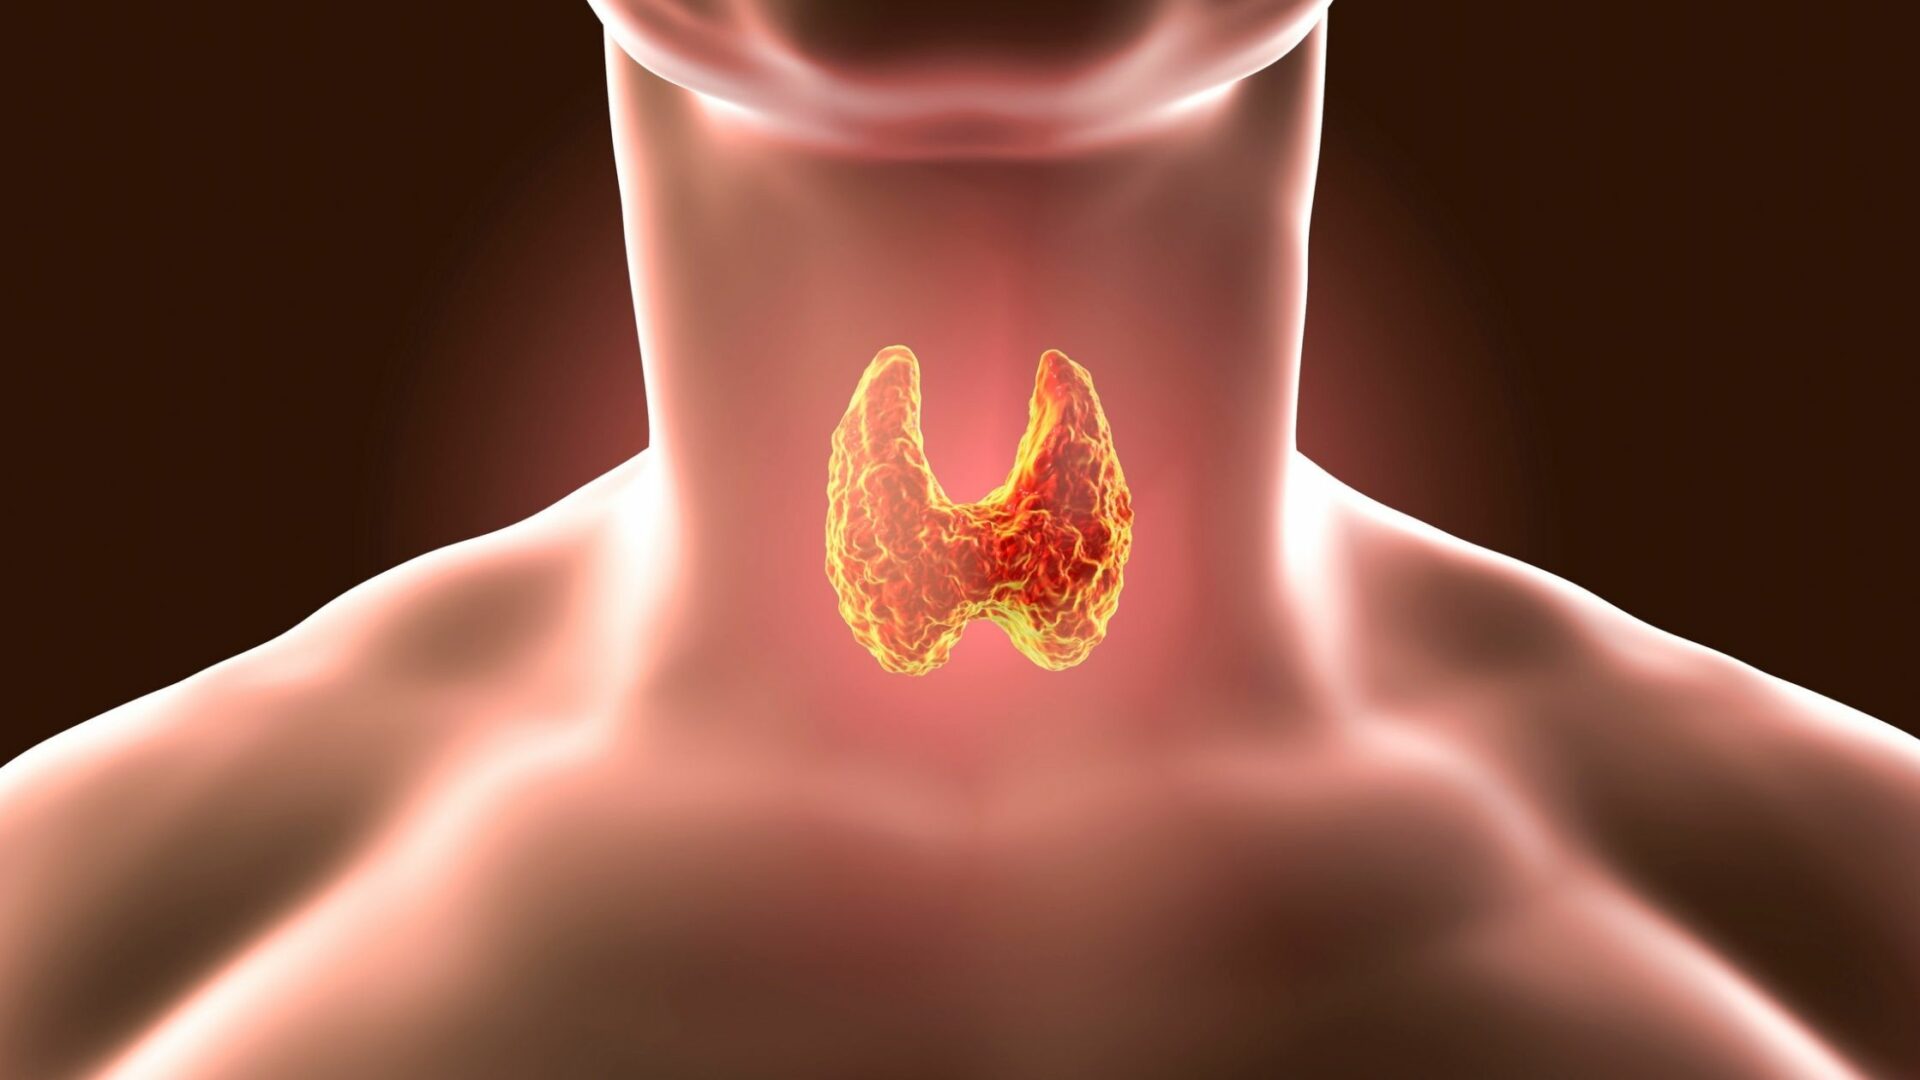 Is My Thyroid Making it Difficult to Lose Weight?